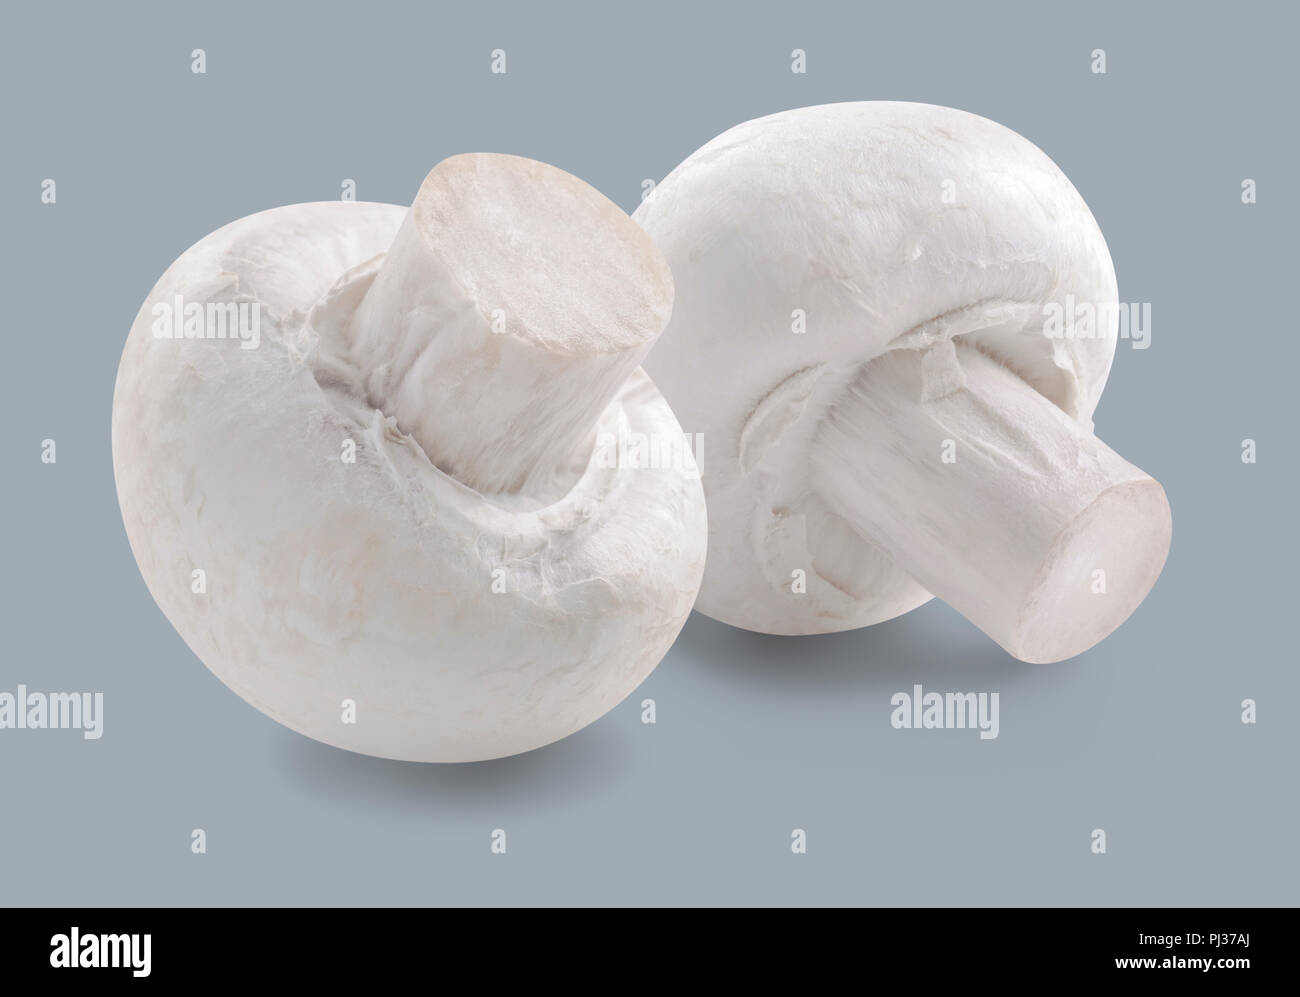 Two button mushroom champignon isolated on grey background for package design Stock Photo